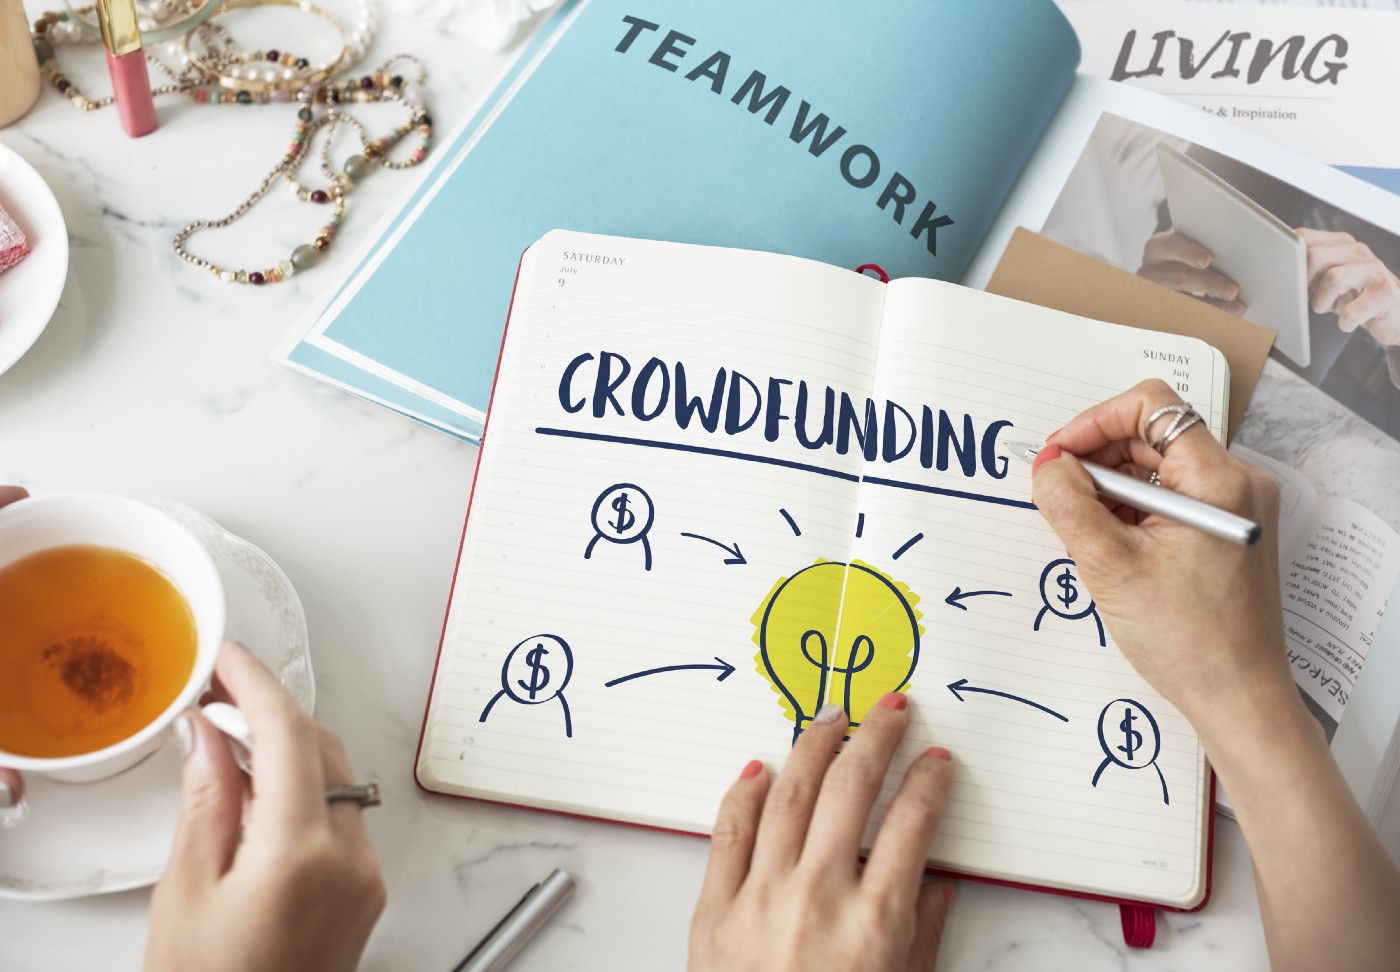 8 Tips for Getting Funds with Crowdfunding! Let's Check This Out